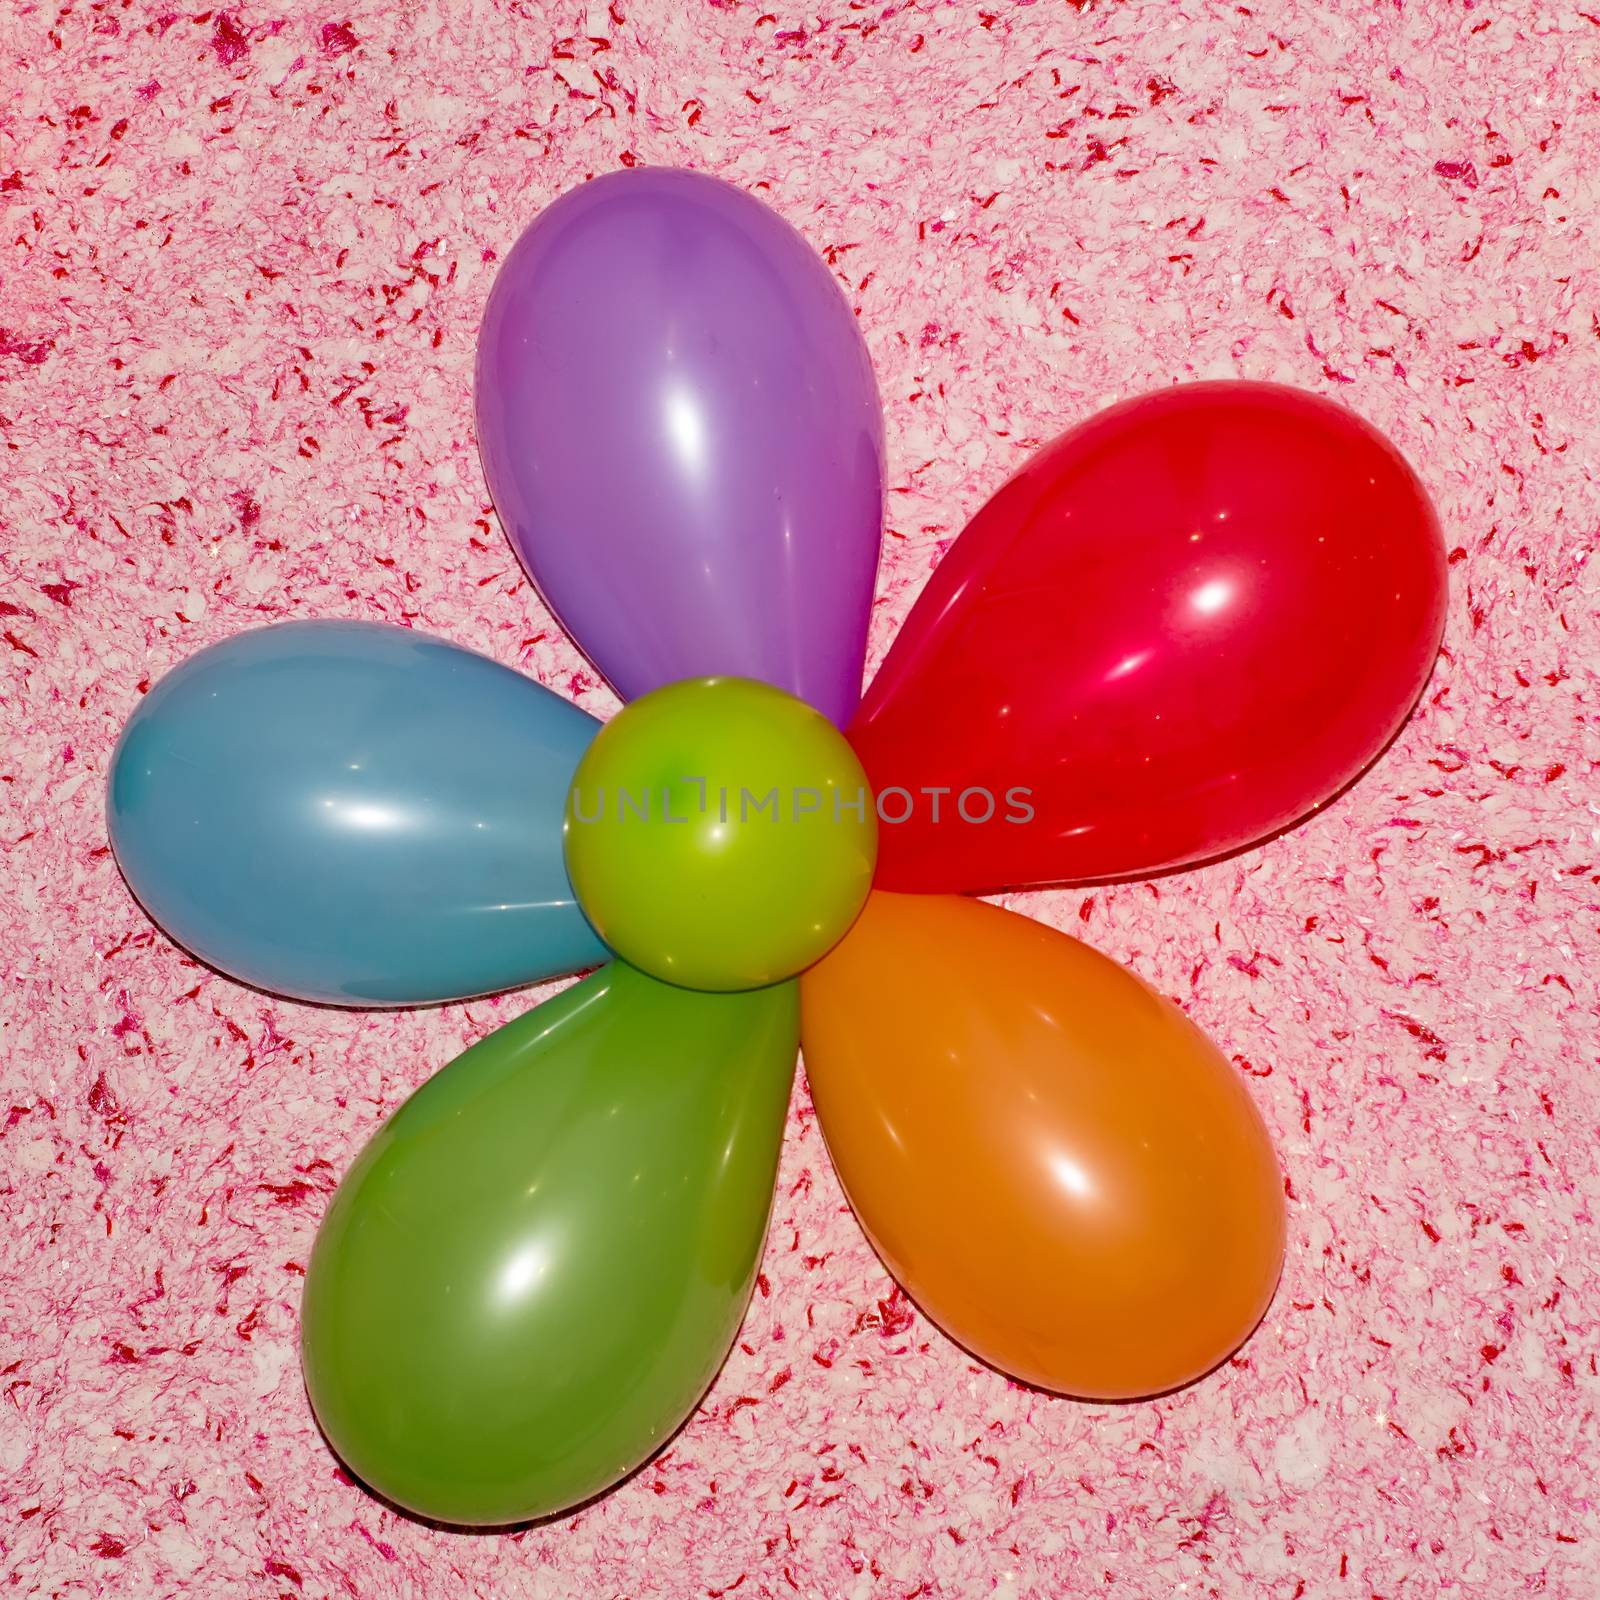 Merry colorful flower with balloons